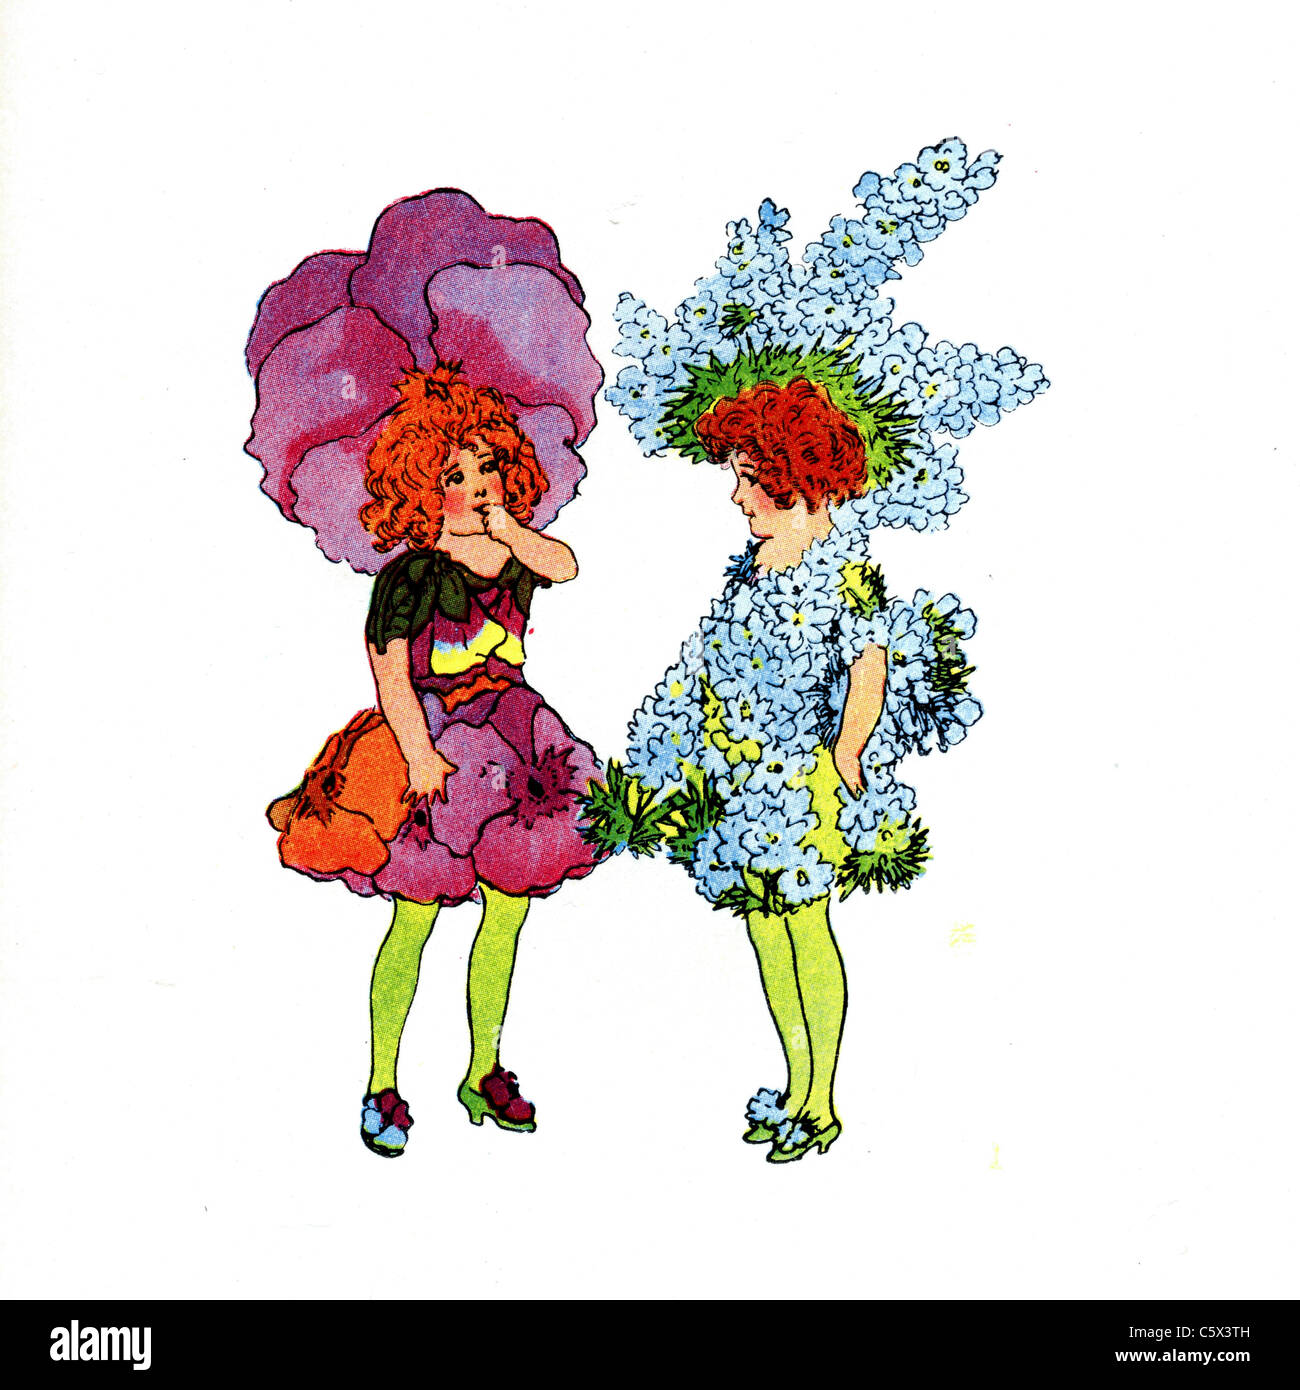 Pansy and Larkspur - Flower Child Illustration from an antiquarian book Stock Photo